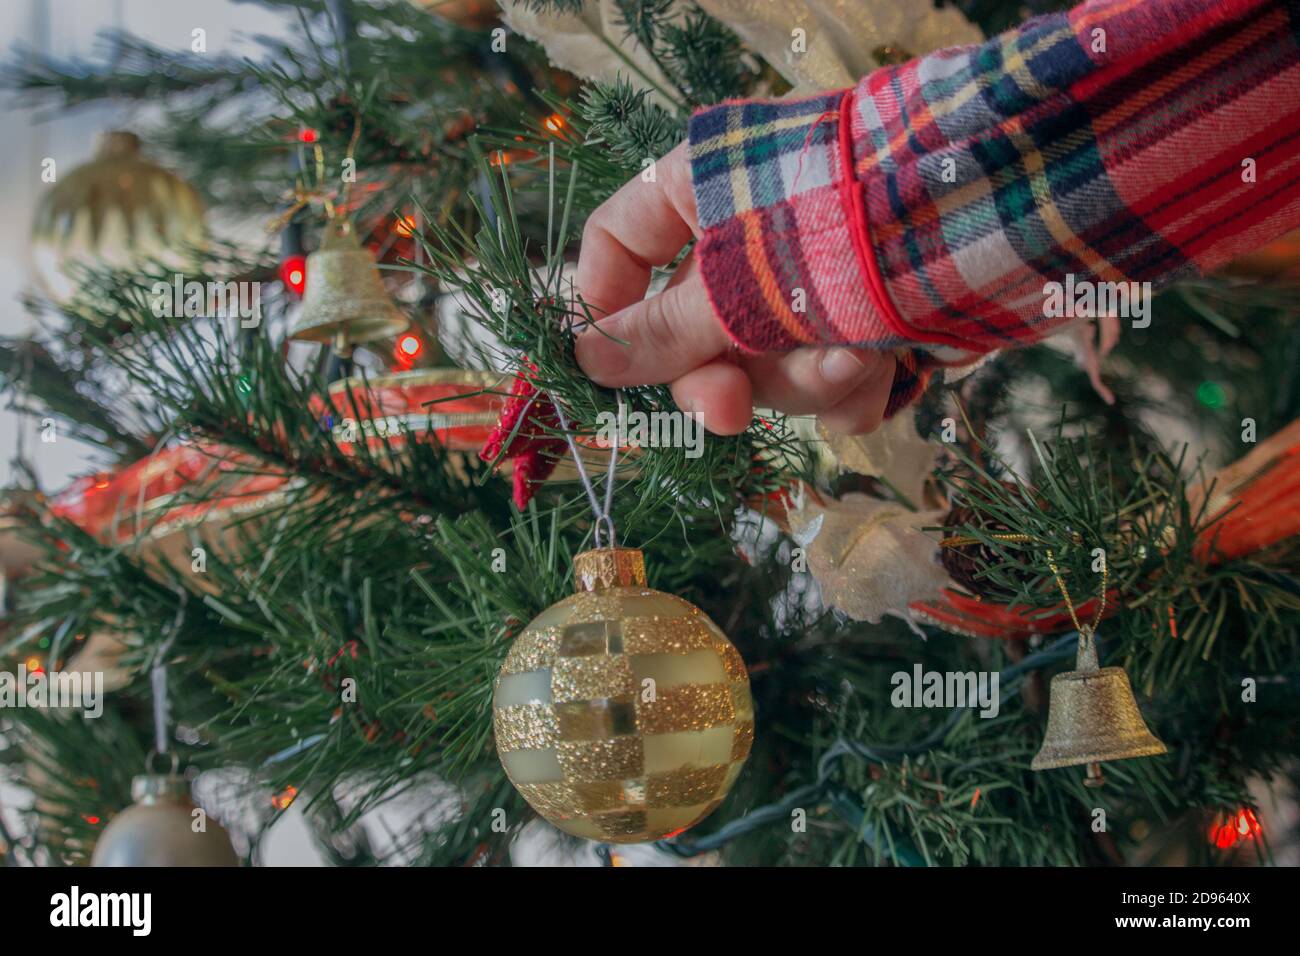 Girl in red pajamas placing a decorative ball on the Christmas tree. Closeup girl holding Christmas ball preparing the Christmas tree for this 2020. Stock Photo